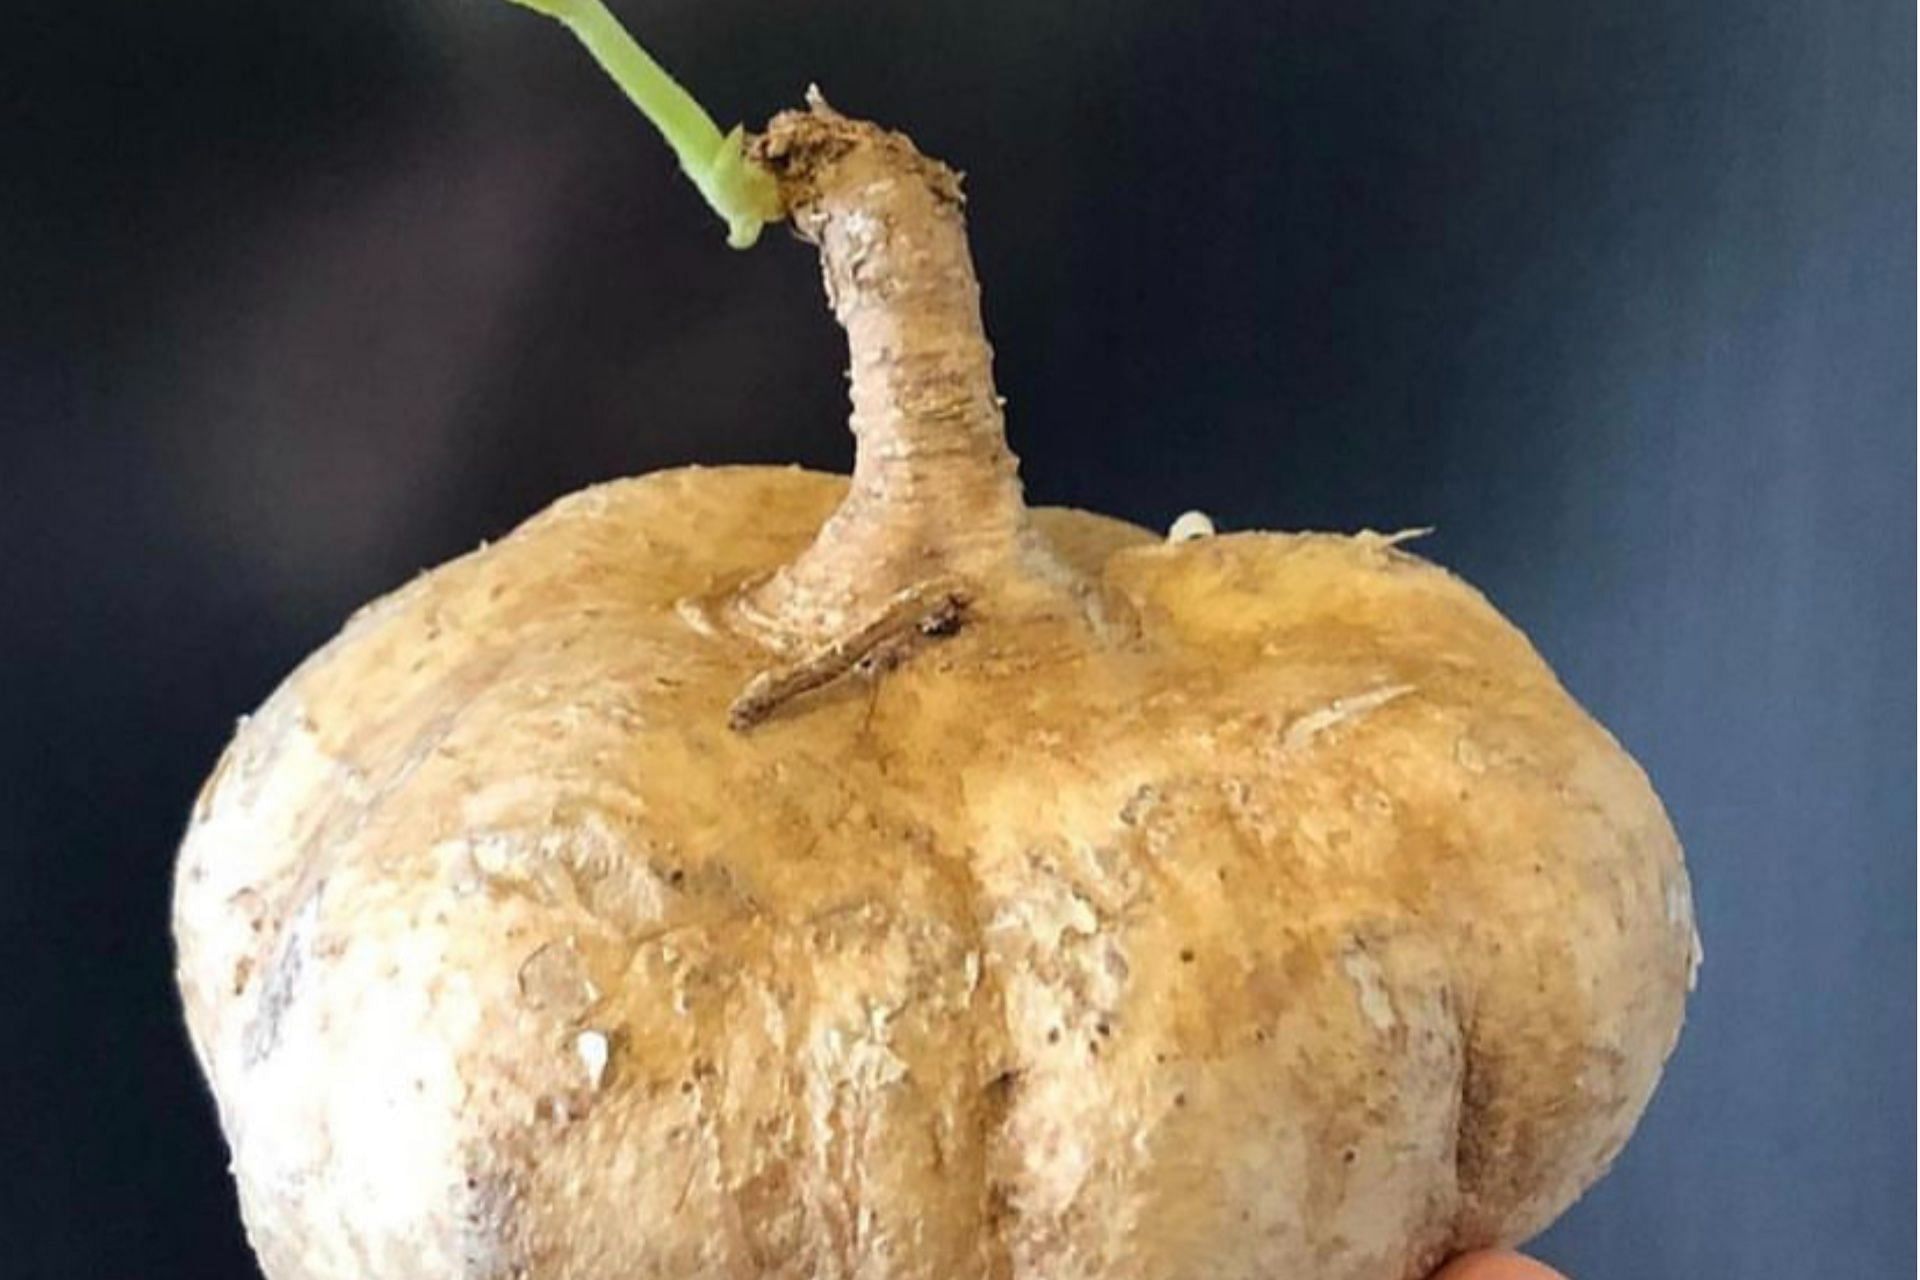 There are numerous health benefits of jicama. (Photo via Instagram/lhylif.verde)